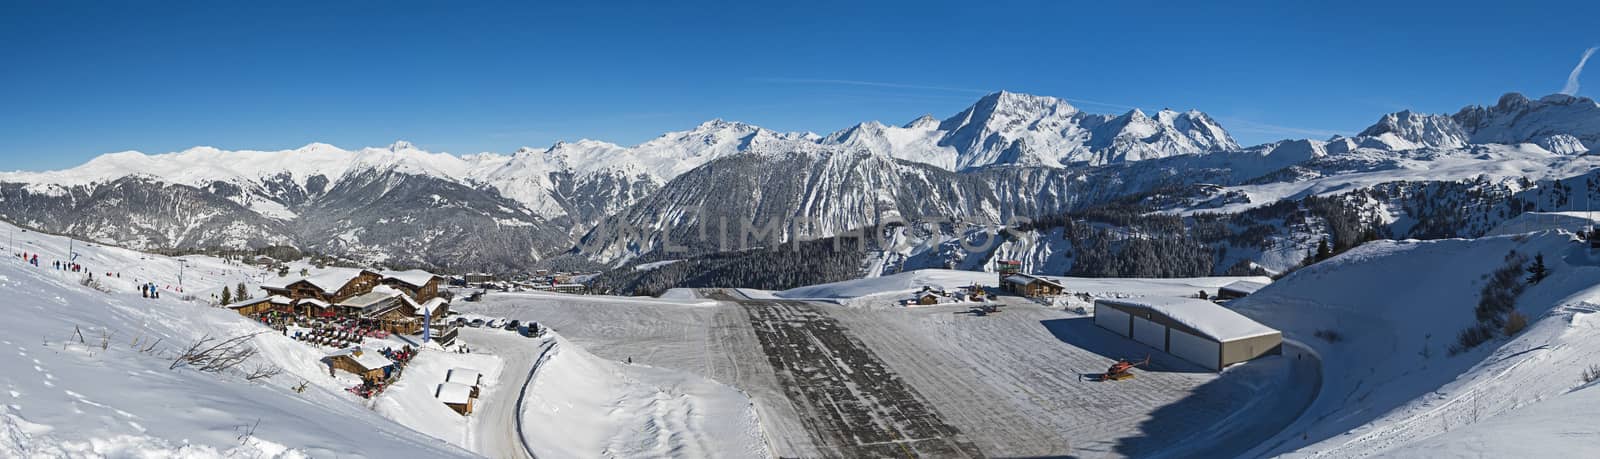 Panoramic landscpae view of small airport altiport runway on the side of a snow covered alpine mountain range in winter